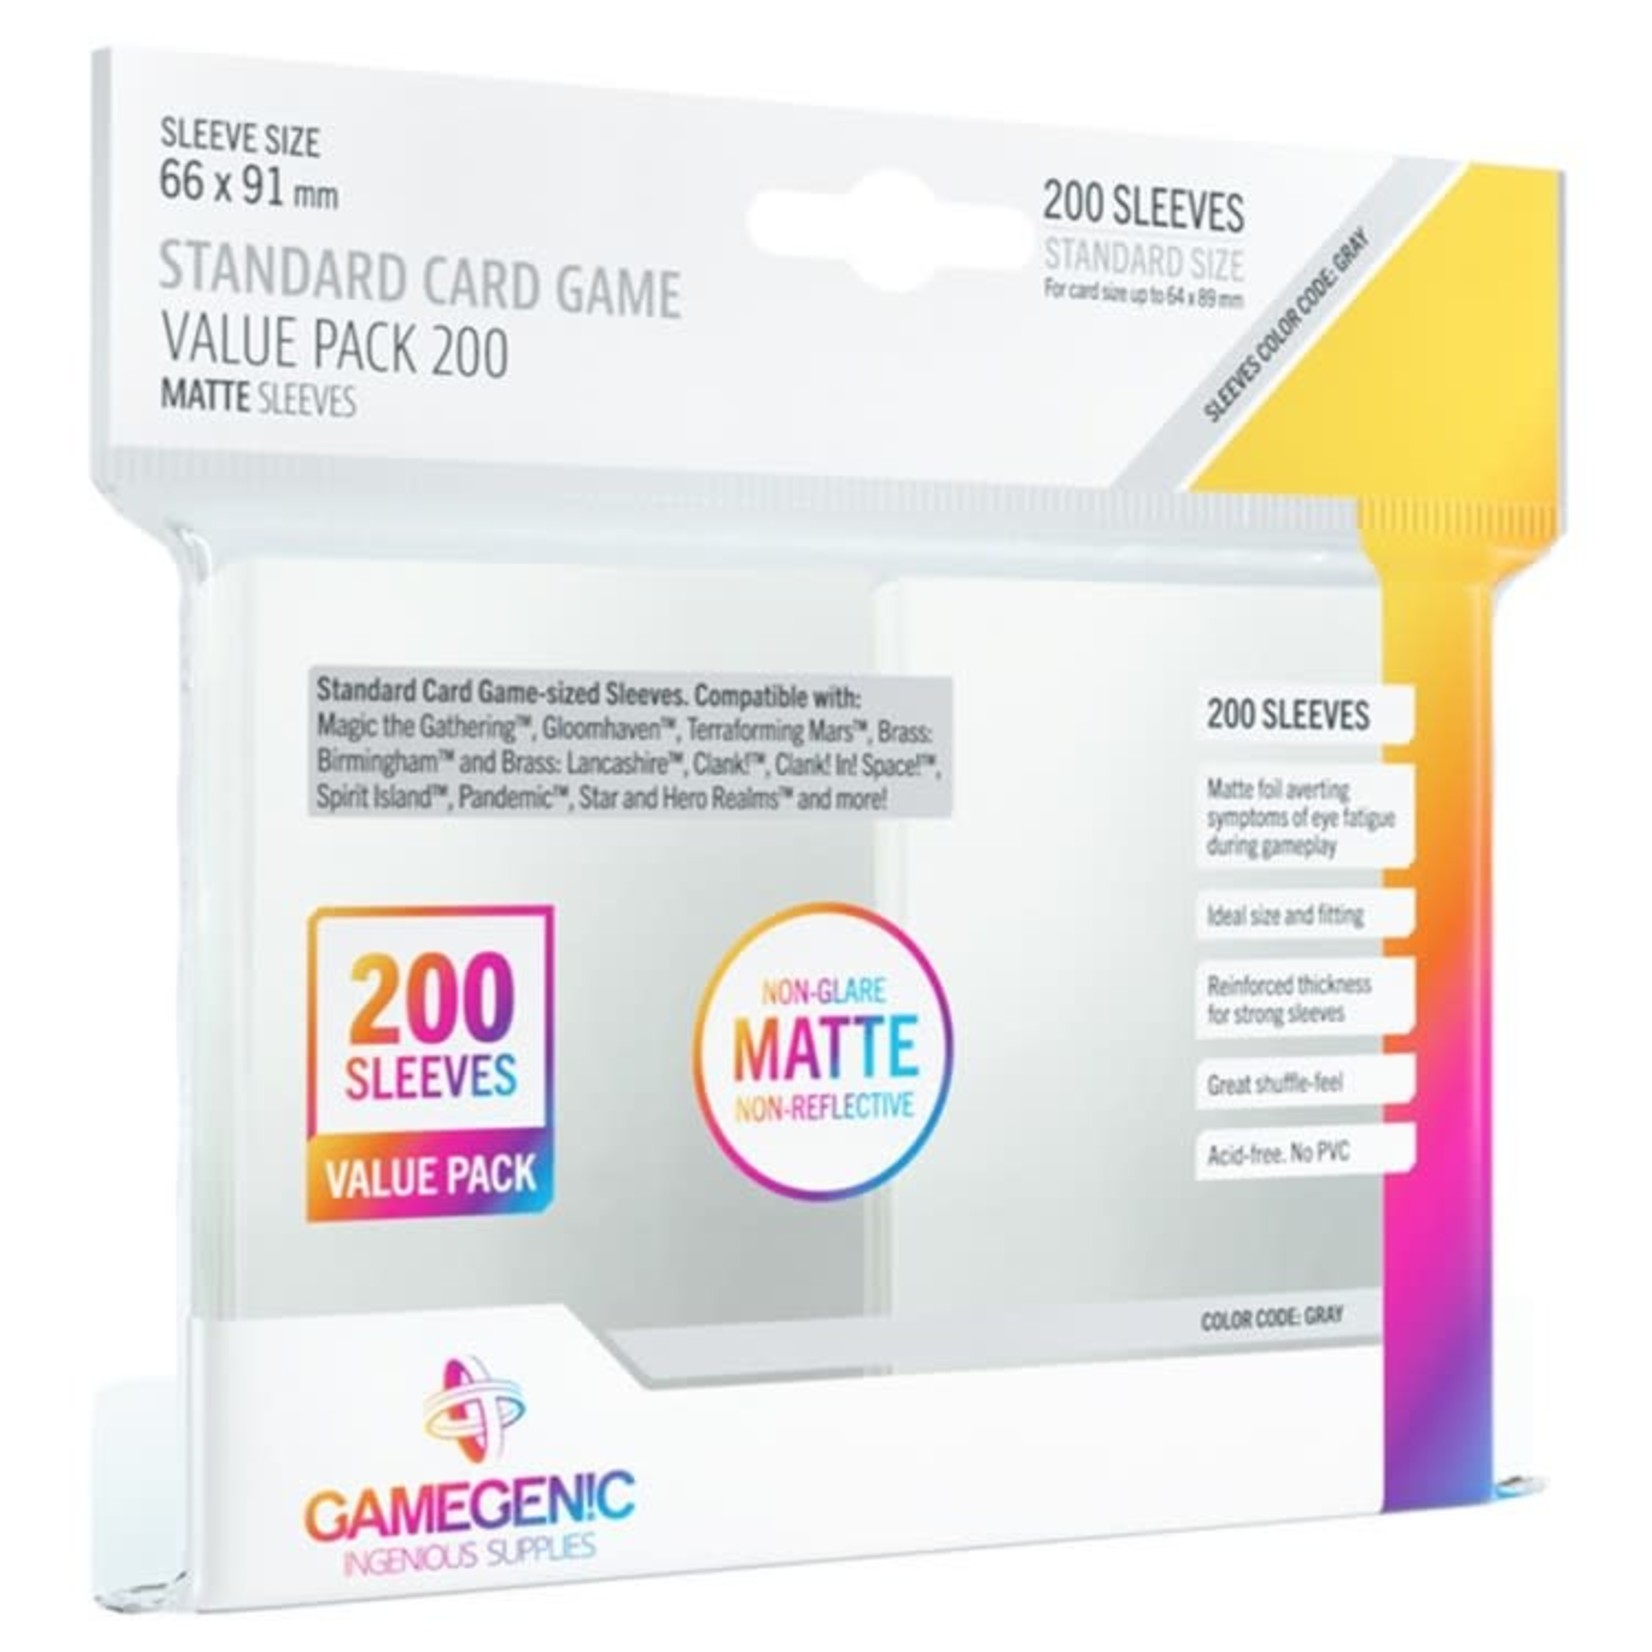 Gamegenic Gamegenic: Matte Board Game Sleeves GRAY Standard Card Game (66 x 91) Value Pack (200)